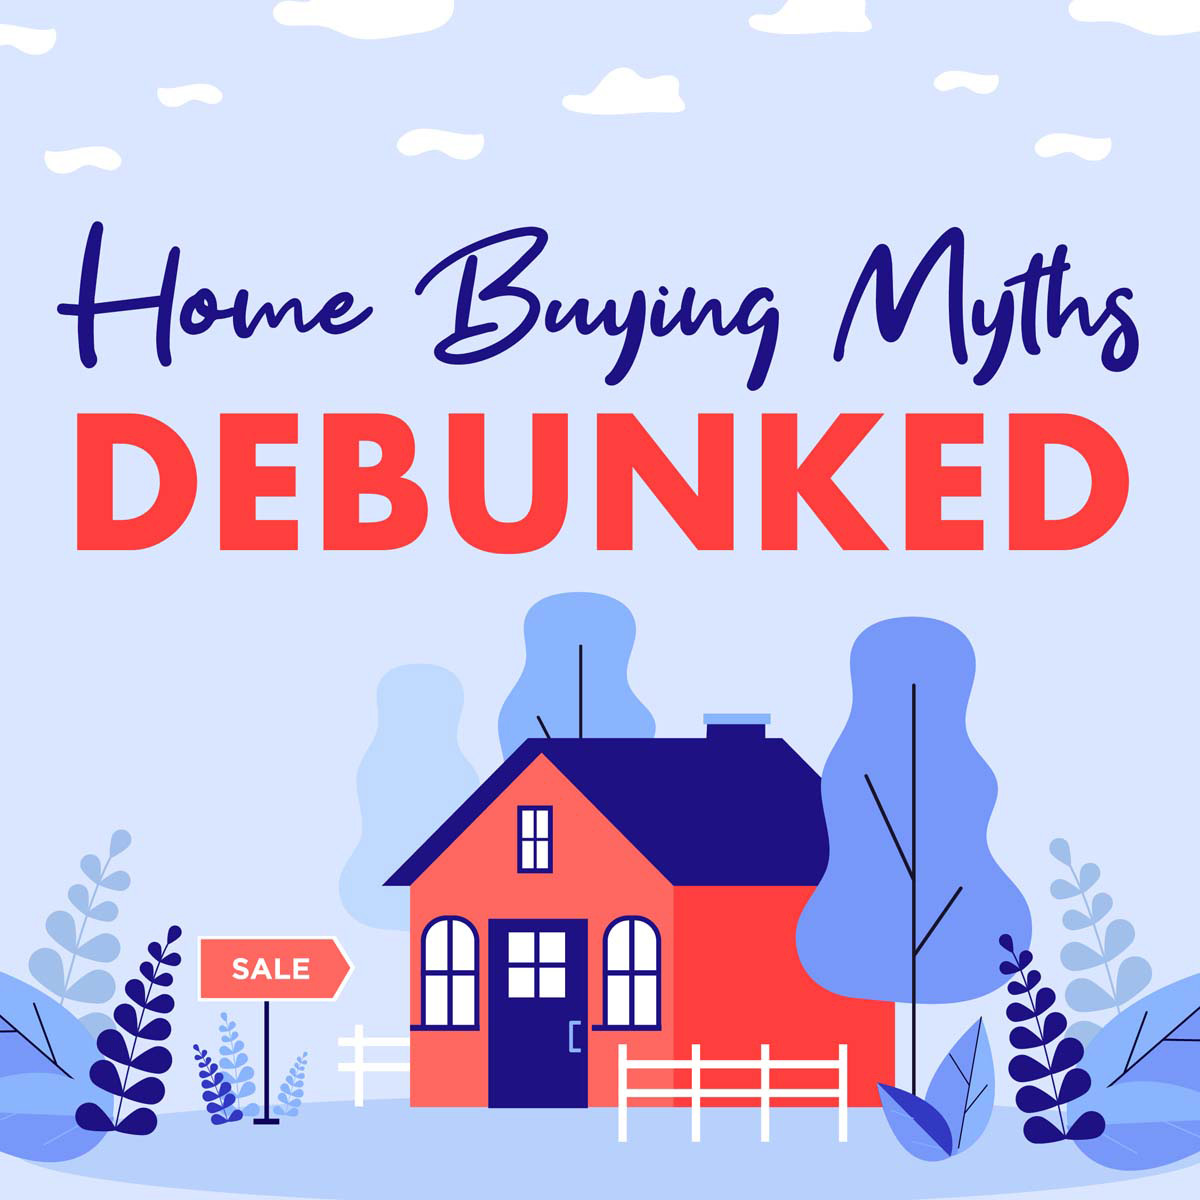 Think you need to be debt-free to own a home? You don’t! Don’t let this myth keep you from achieving your dreams. Contact me today to learn more!  (954)330-2624